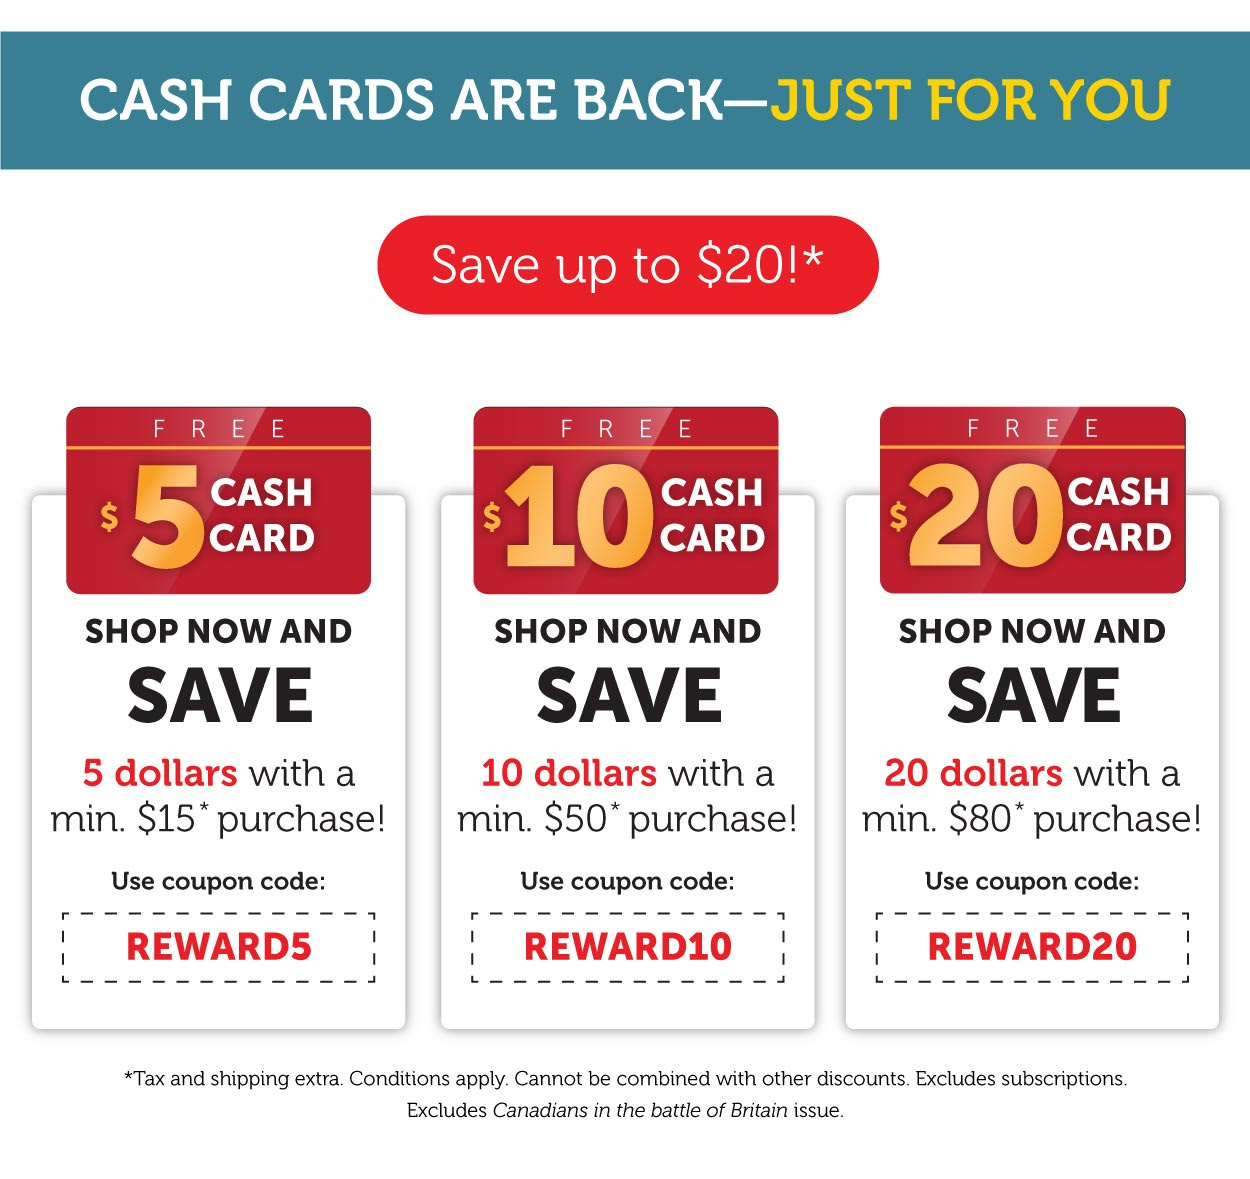 Cash Cards are back!